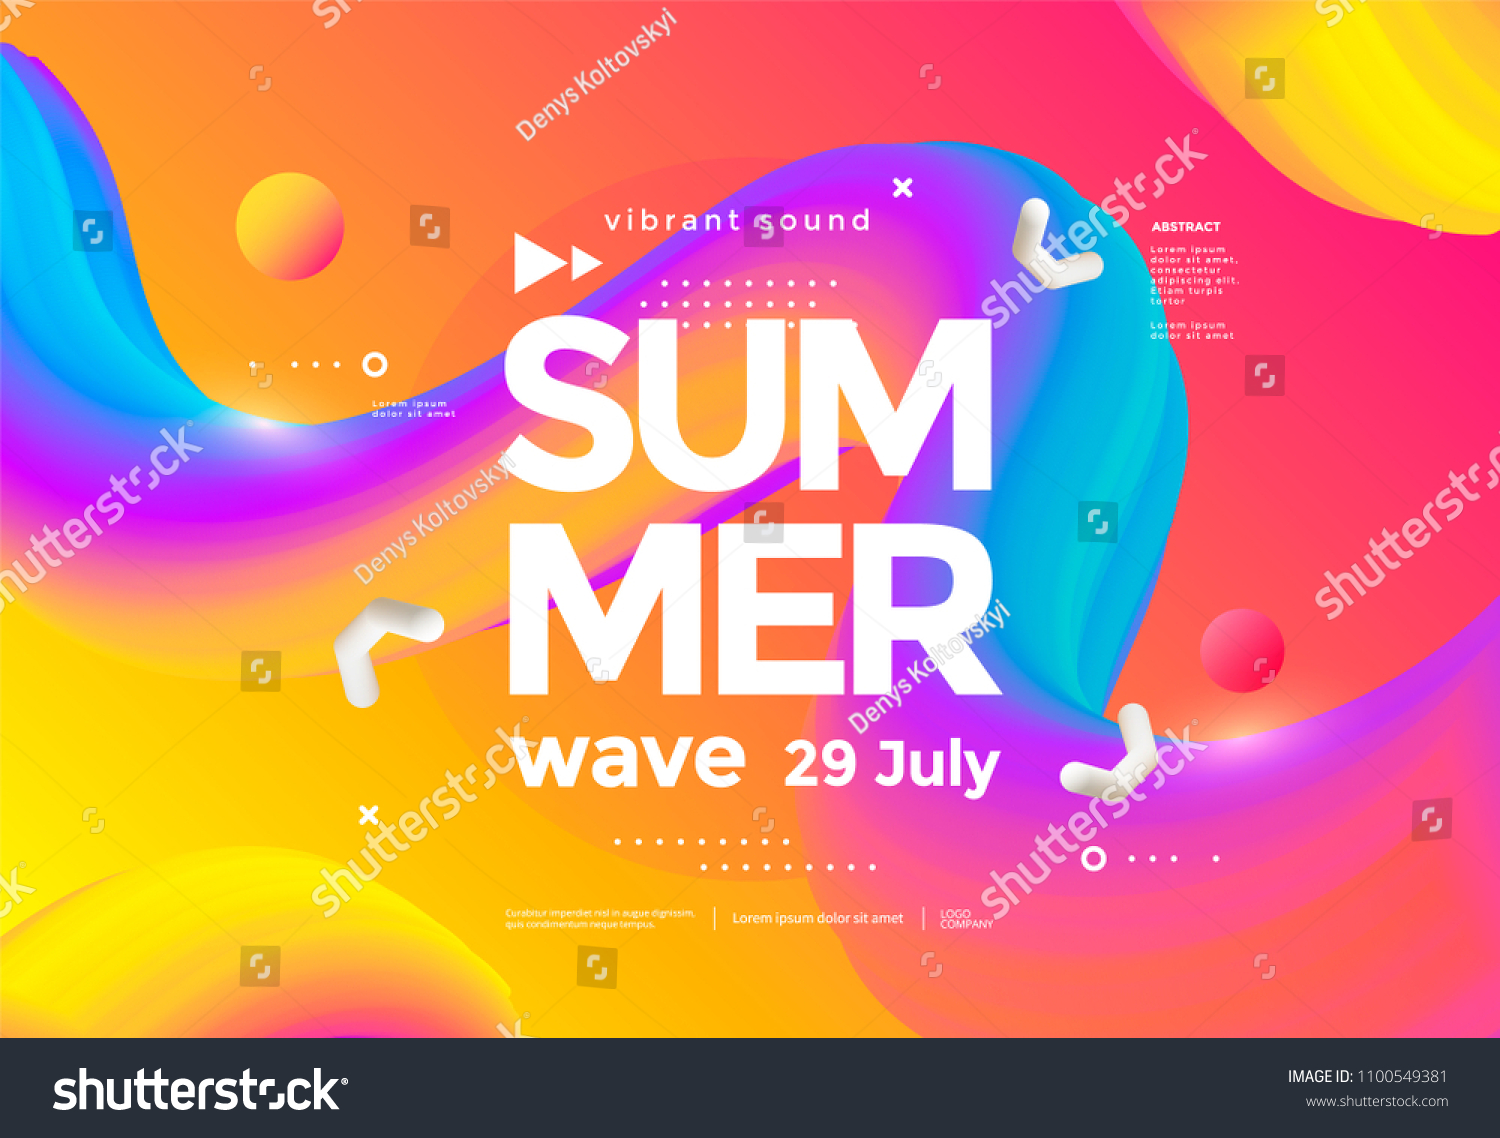 Electronic music fest summer wave poster. Club party flyer. Abstract gradients waves music background. #1100549381